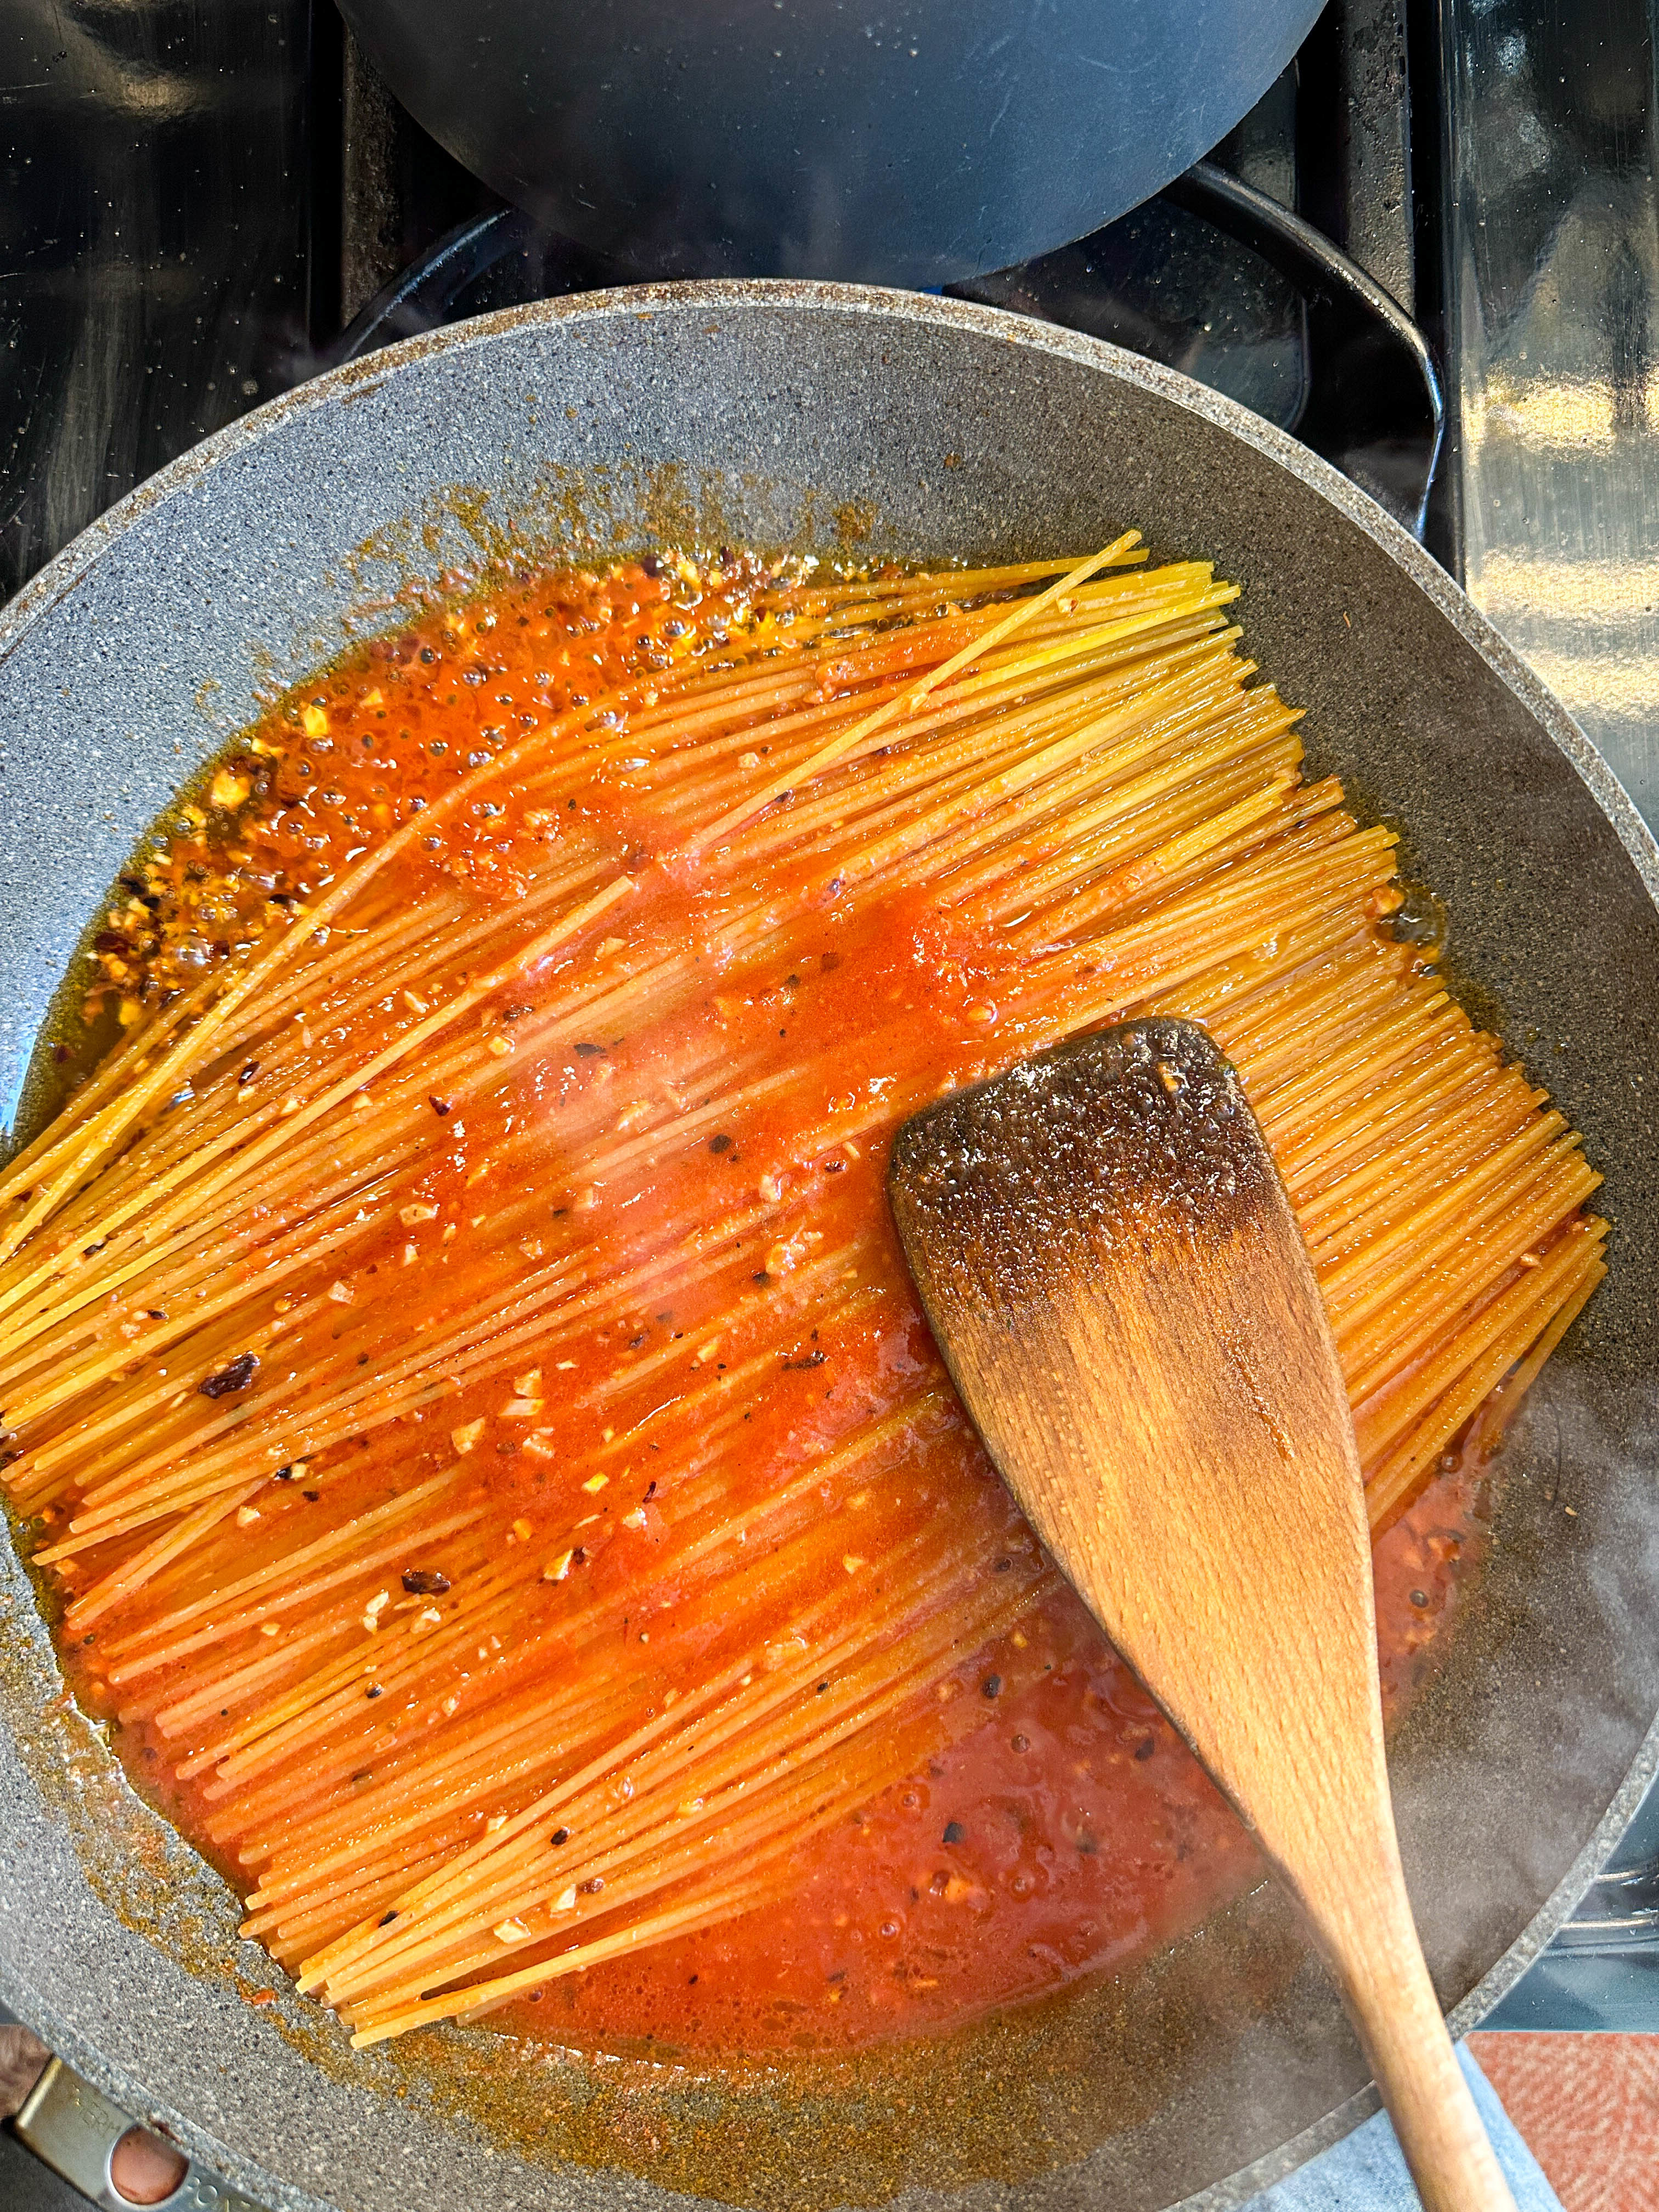 Uncooked spaghetti with sauce in a pan with a wooden spoon